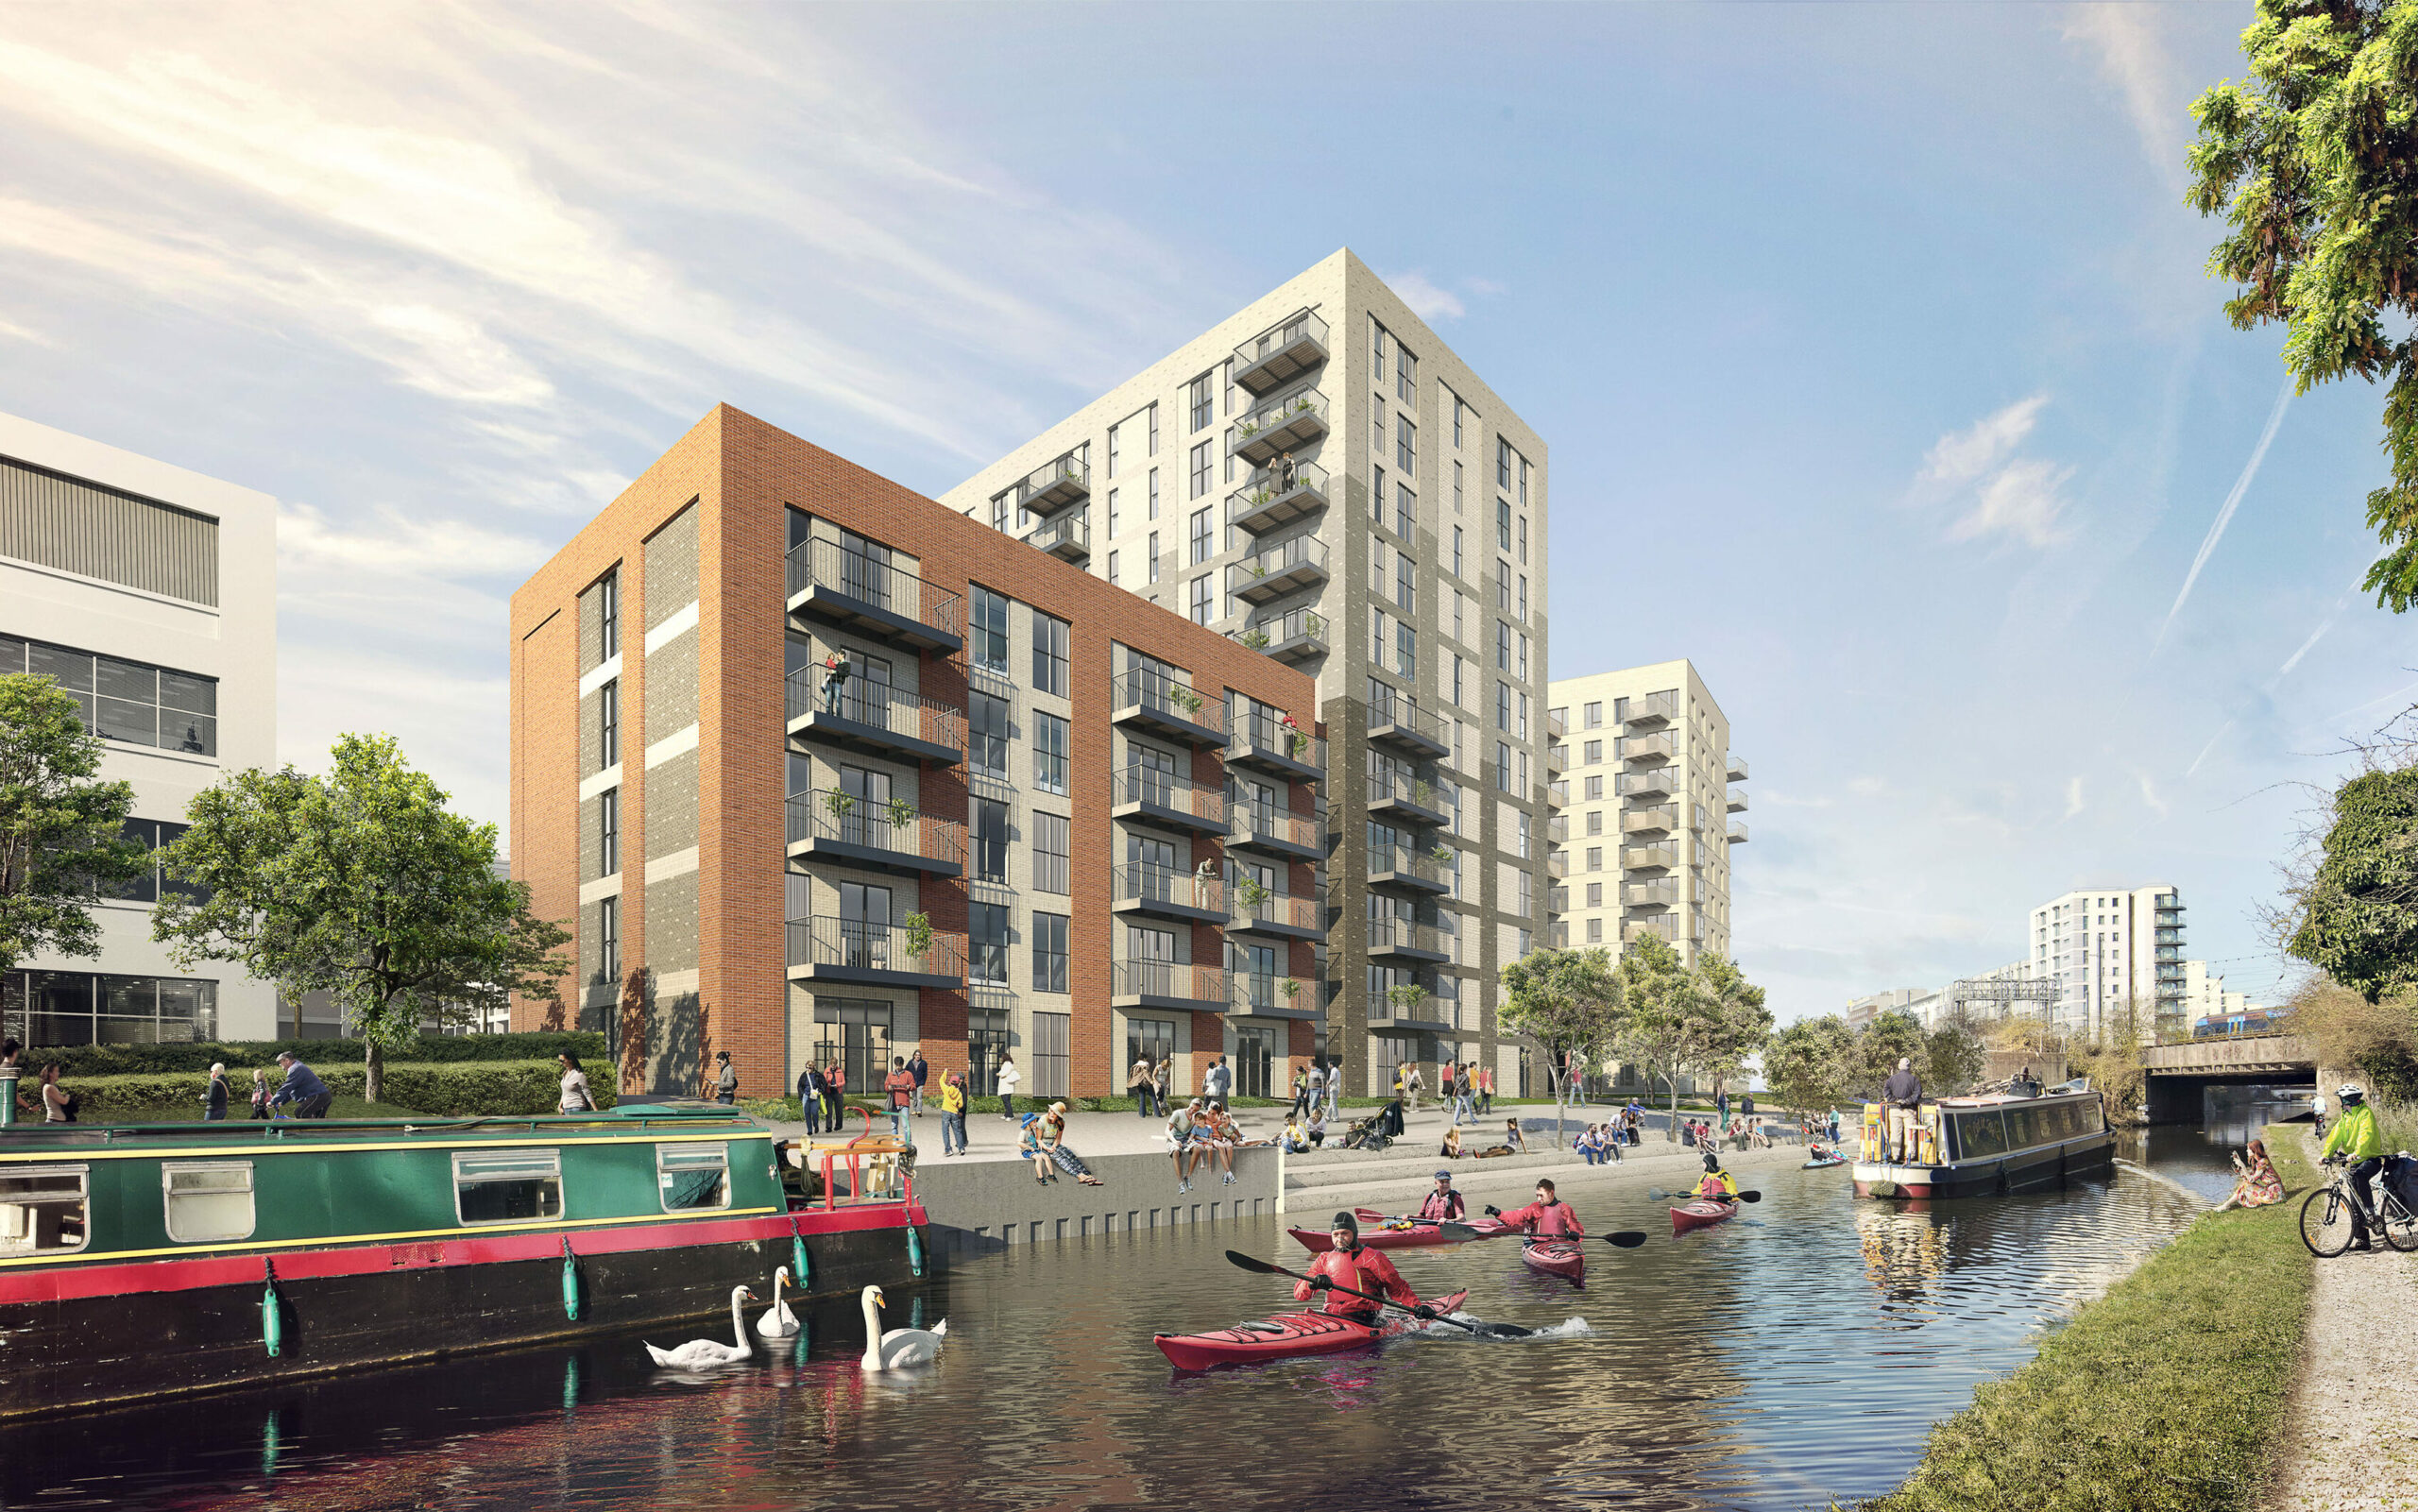 External CGI Of L&Q's, L&Q at Hayes Village Development, available to purchase through Share Ownership on Share to Buy 